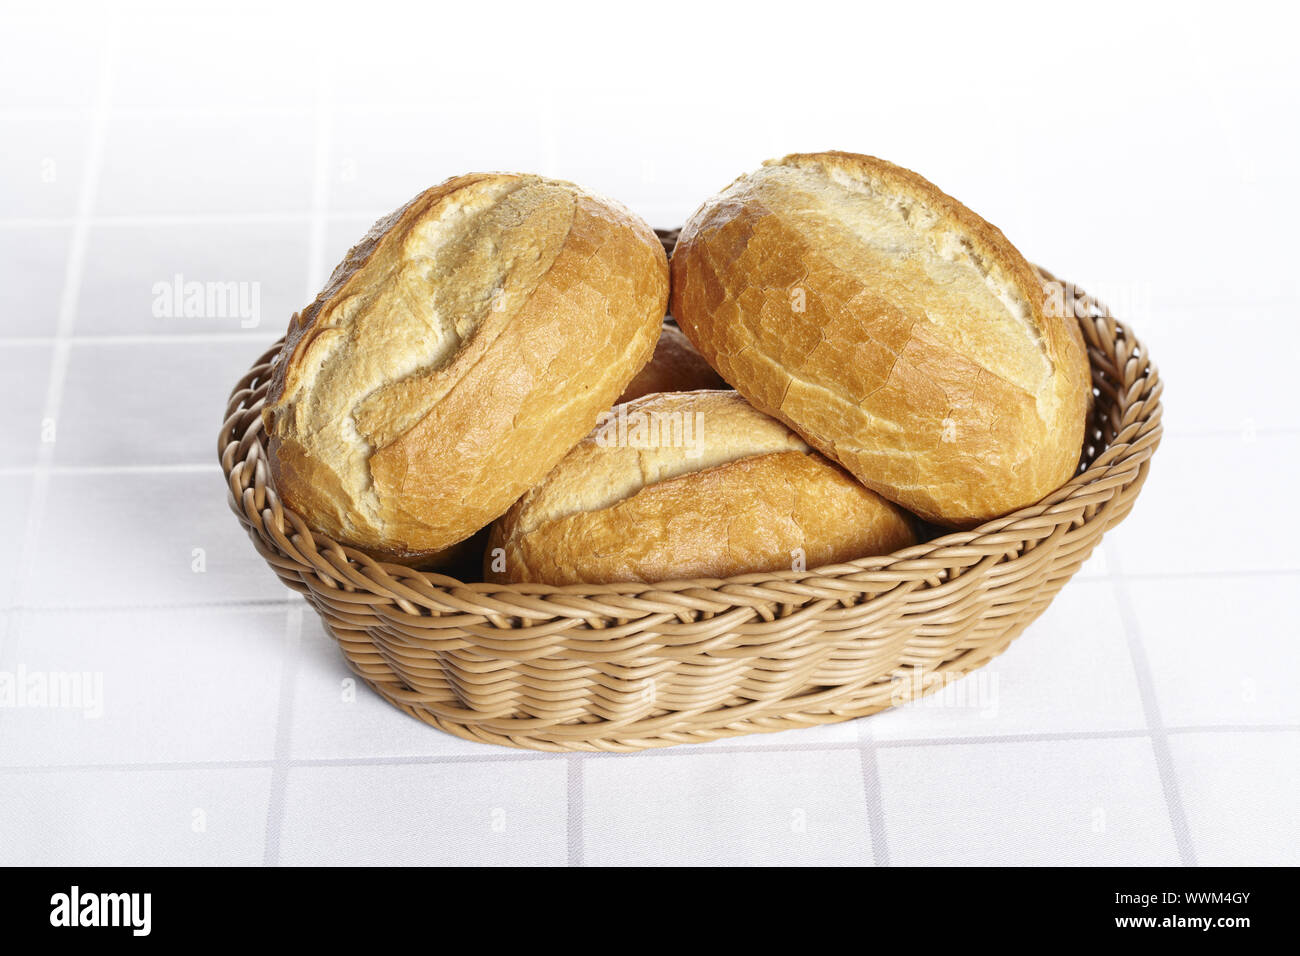 Basket with bread rolls on dams tablecloth Stock Photo